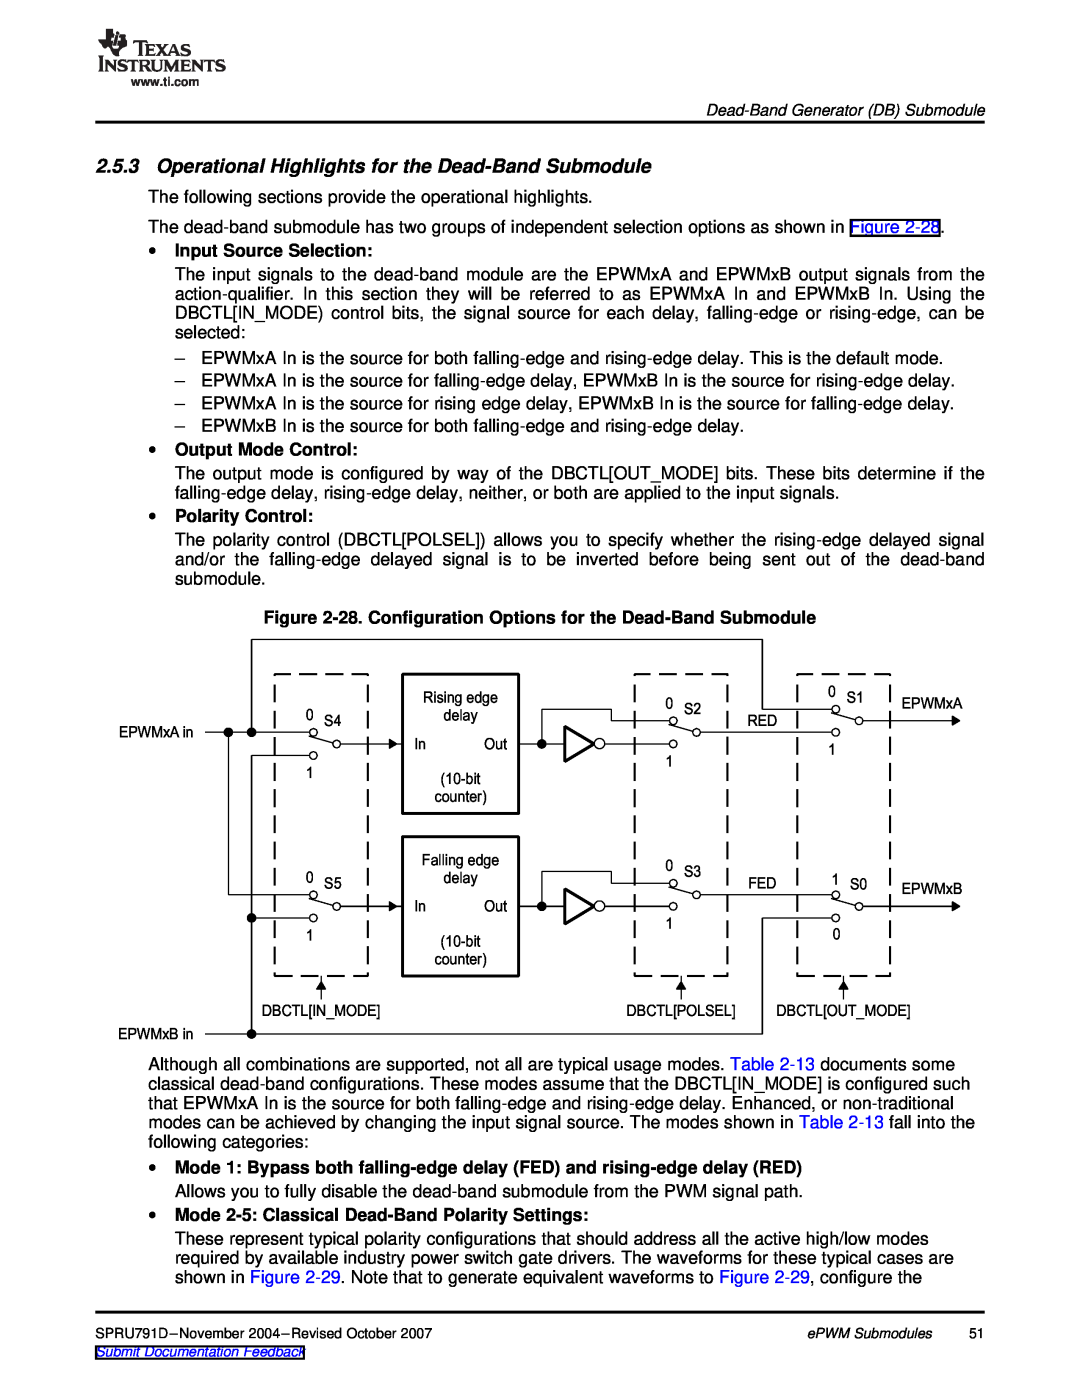 Texas Instruments 28xxx Operational Highlights for the Dead-Band Submodule, ∙ Input Source Selection, ∙ Polarity Control 